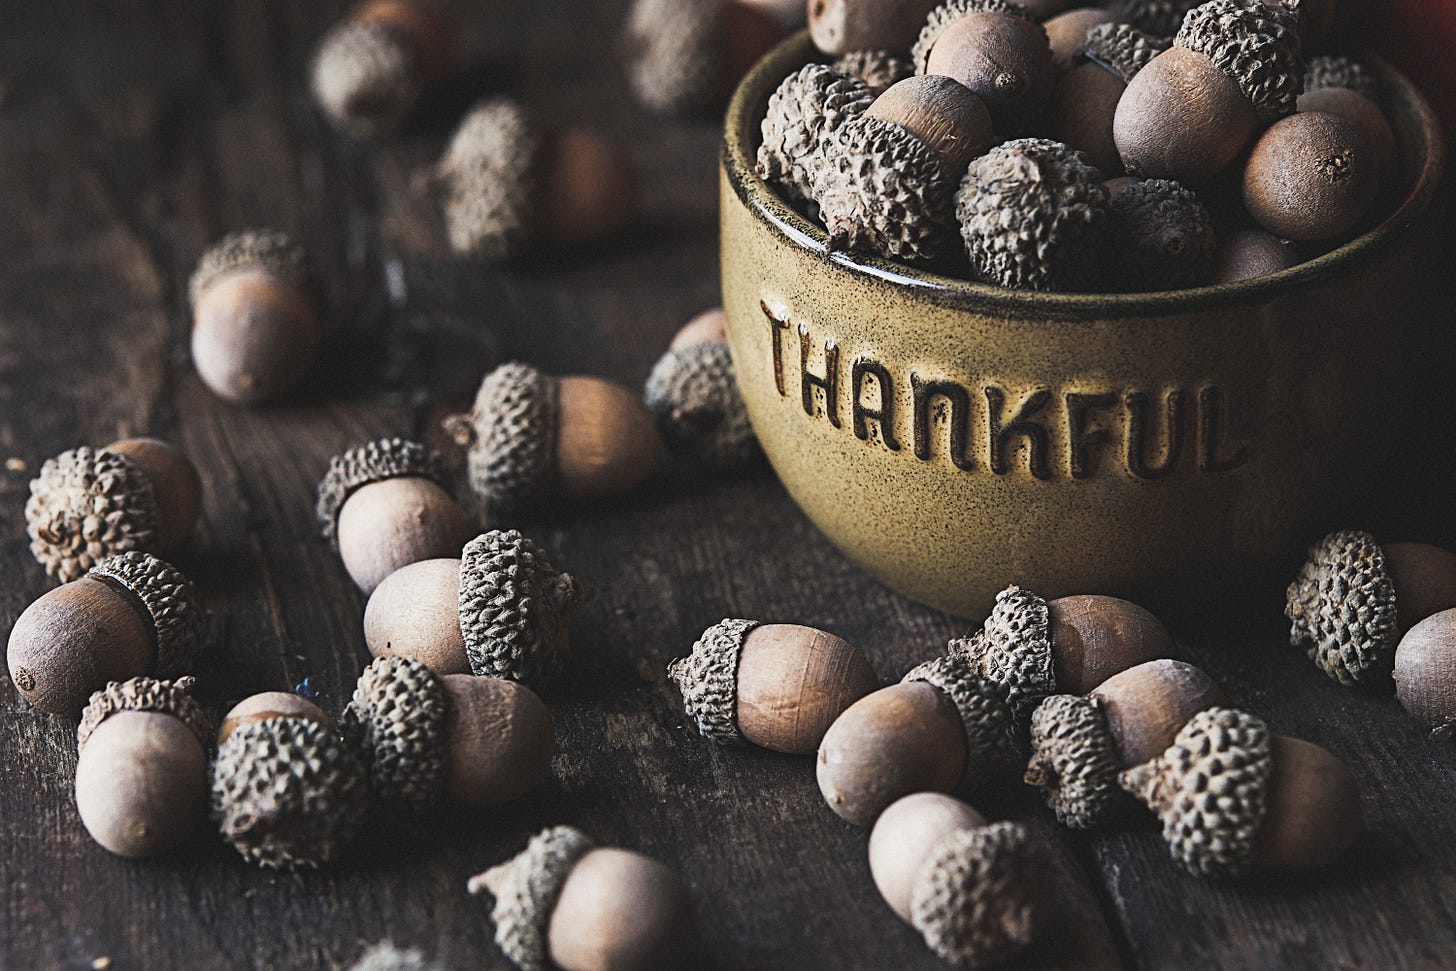 A bowl of acorns with the word "Thankful" written on it